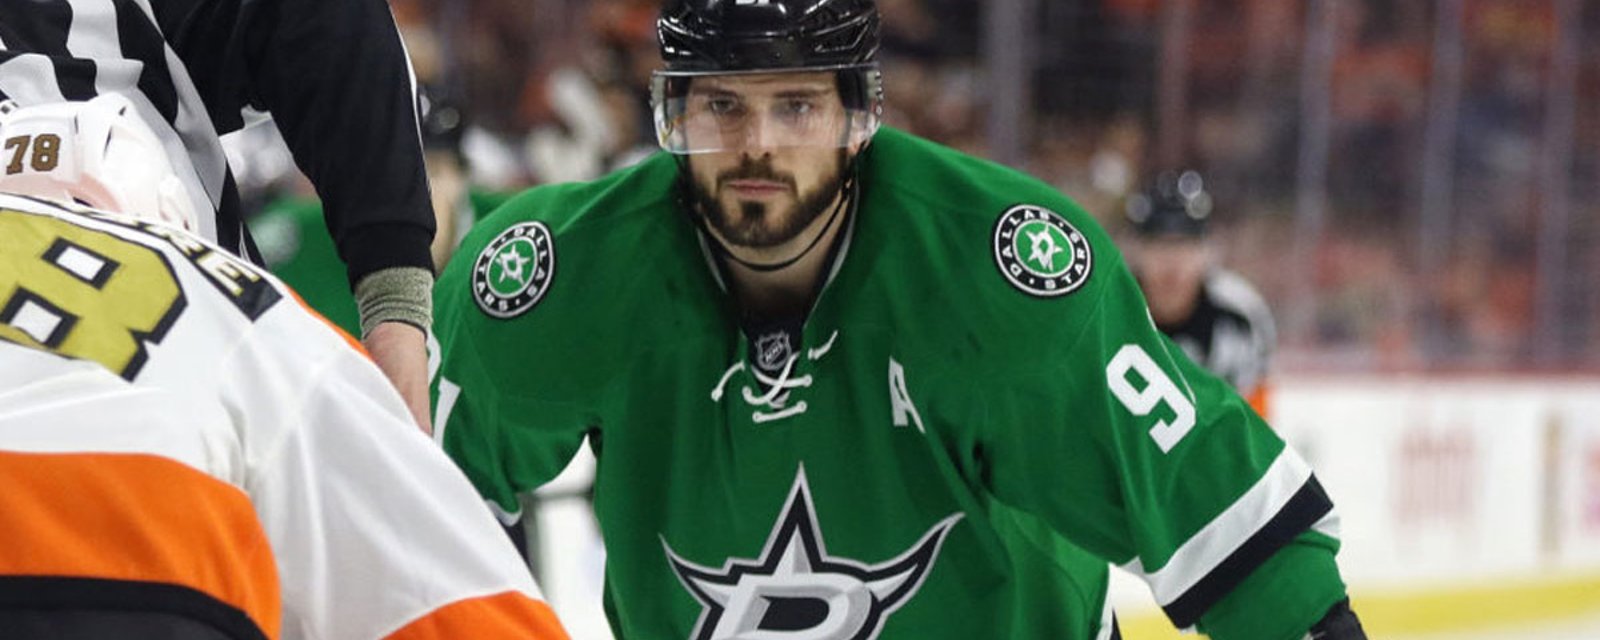 Seguin makes controversial statement about racial matter!